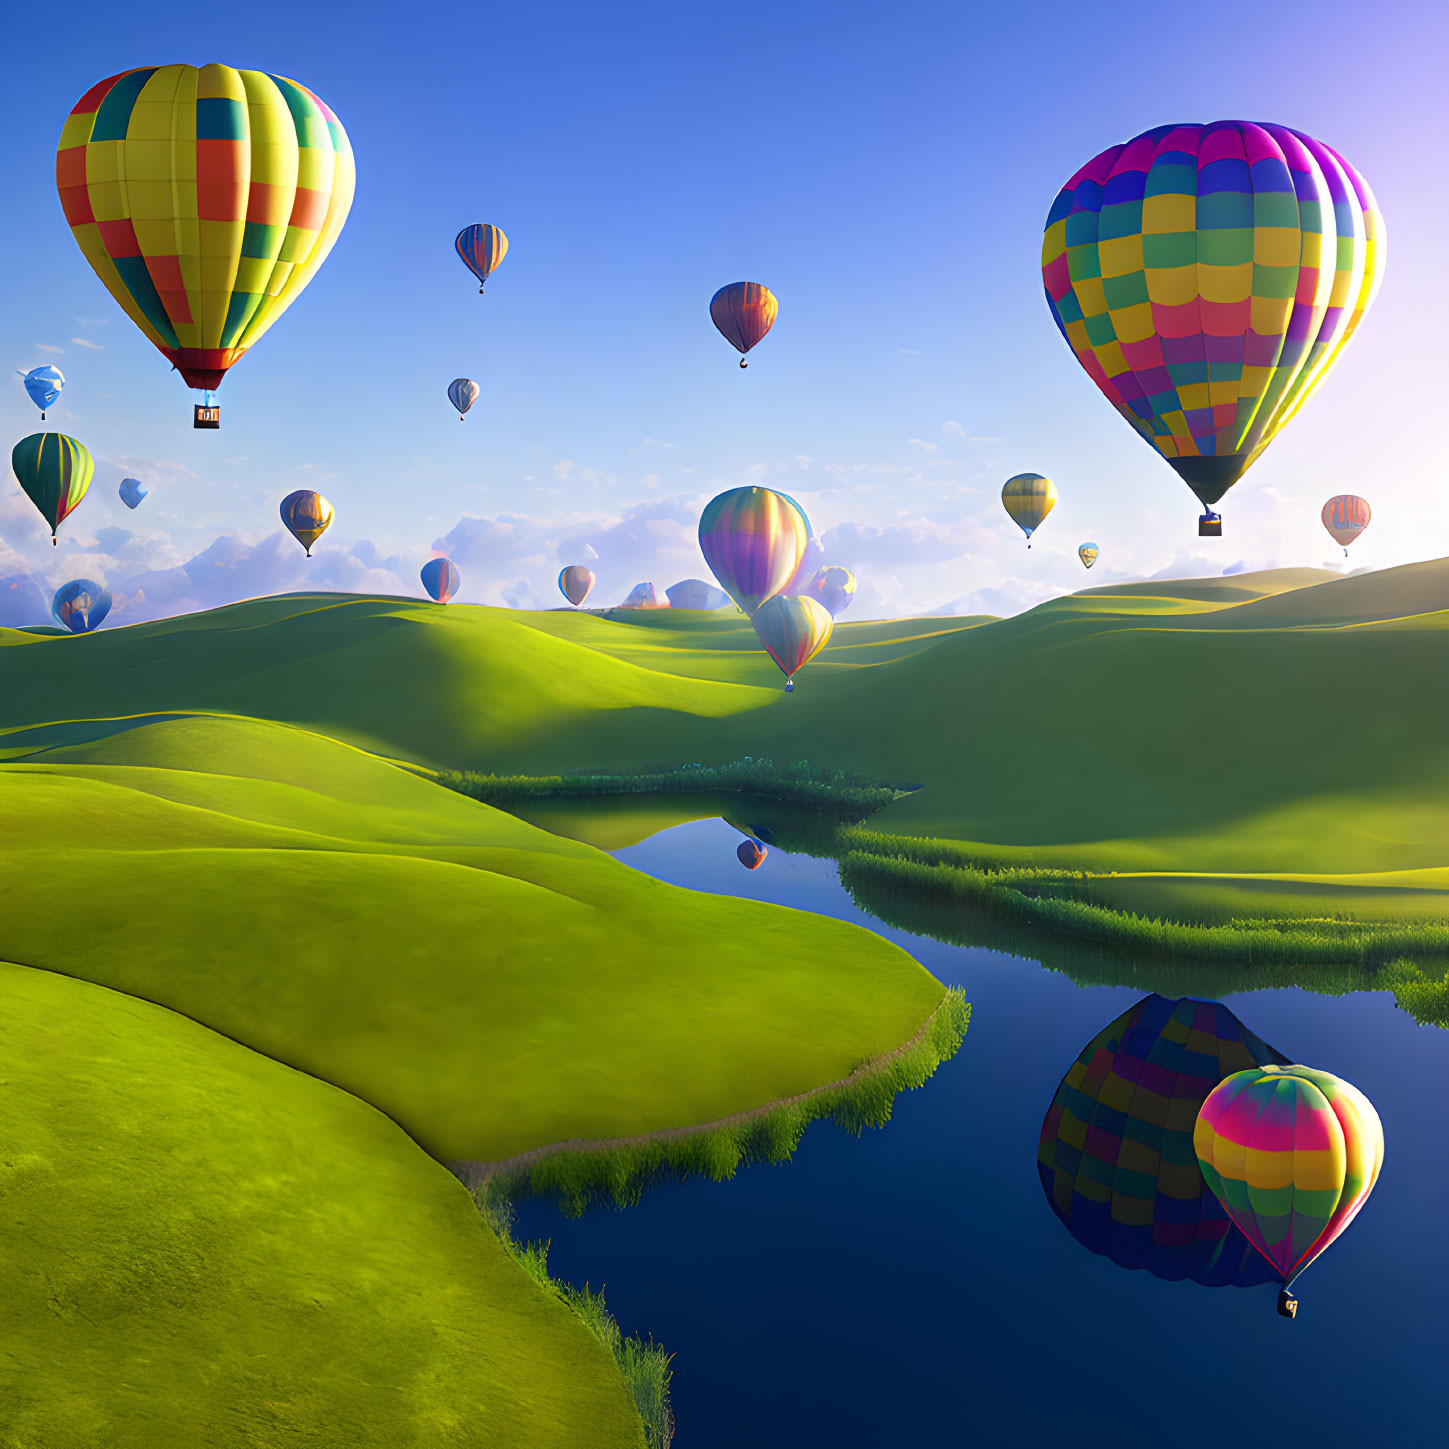 Vibrant hot air balloons over serene landscape with green hills & reflective lake